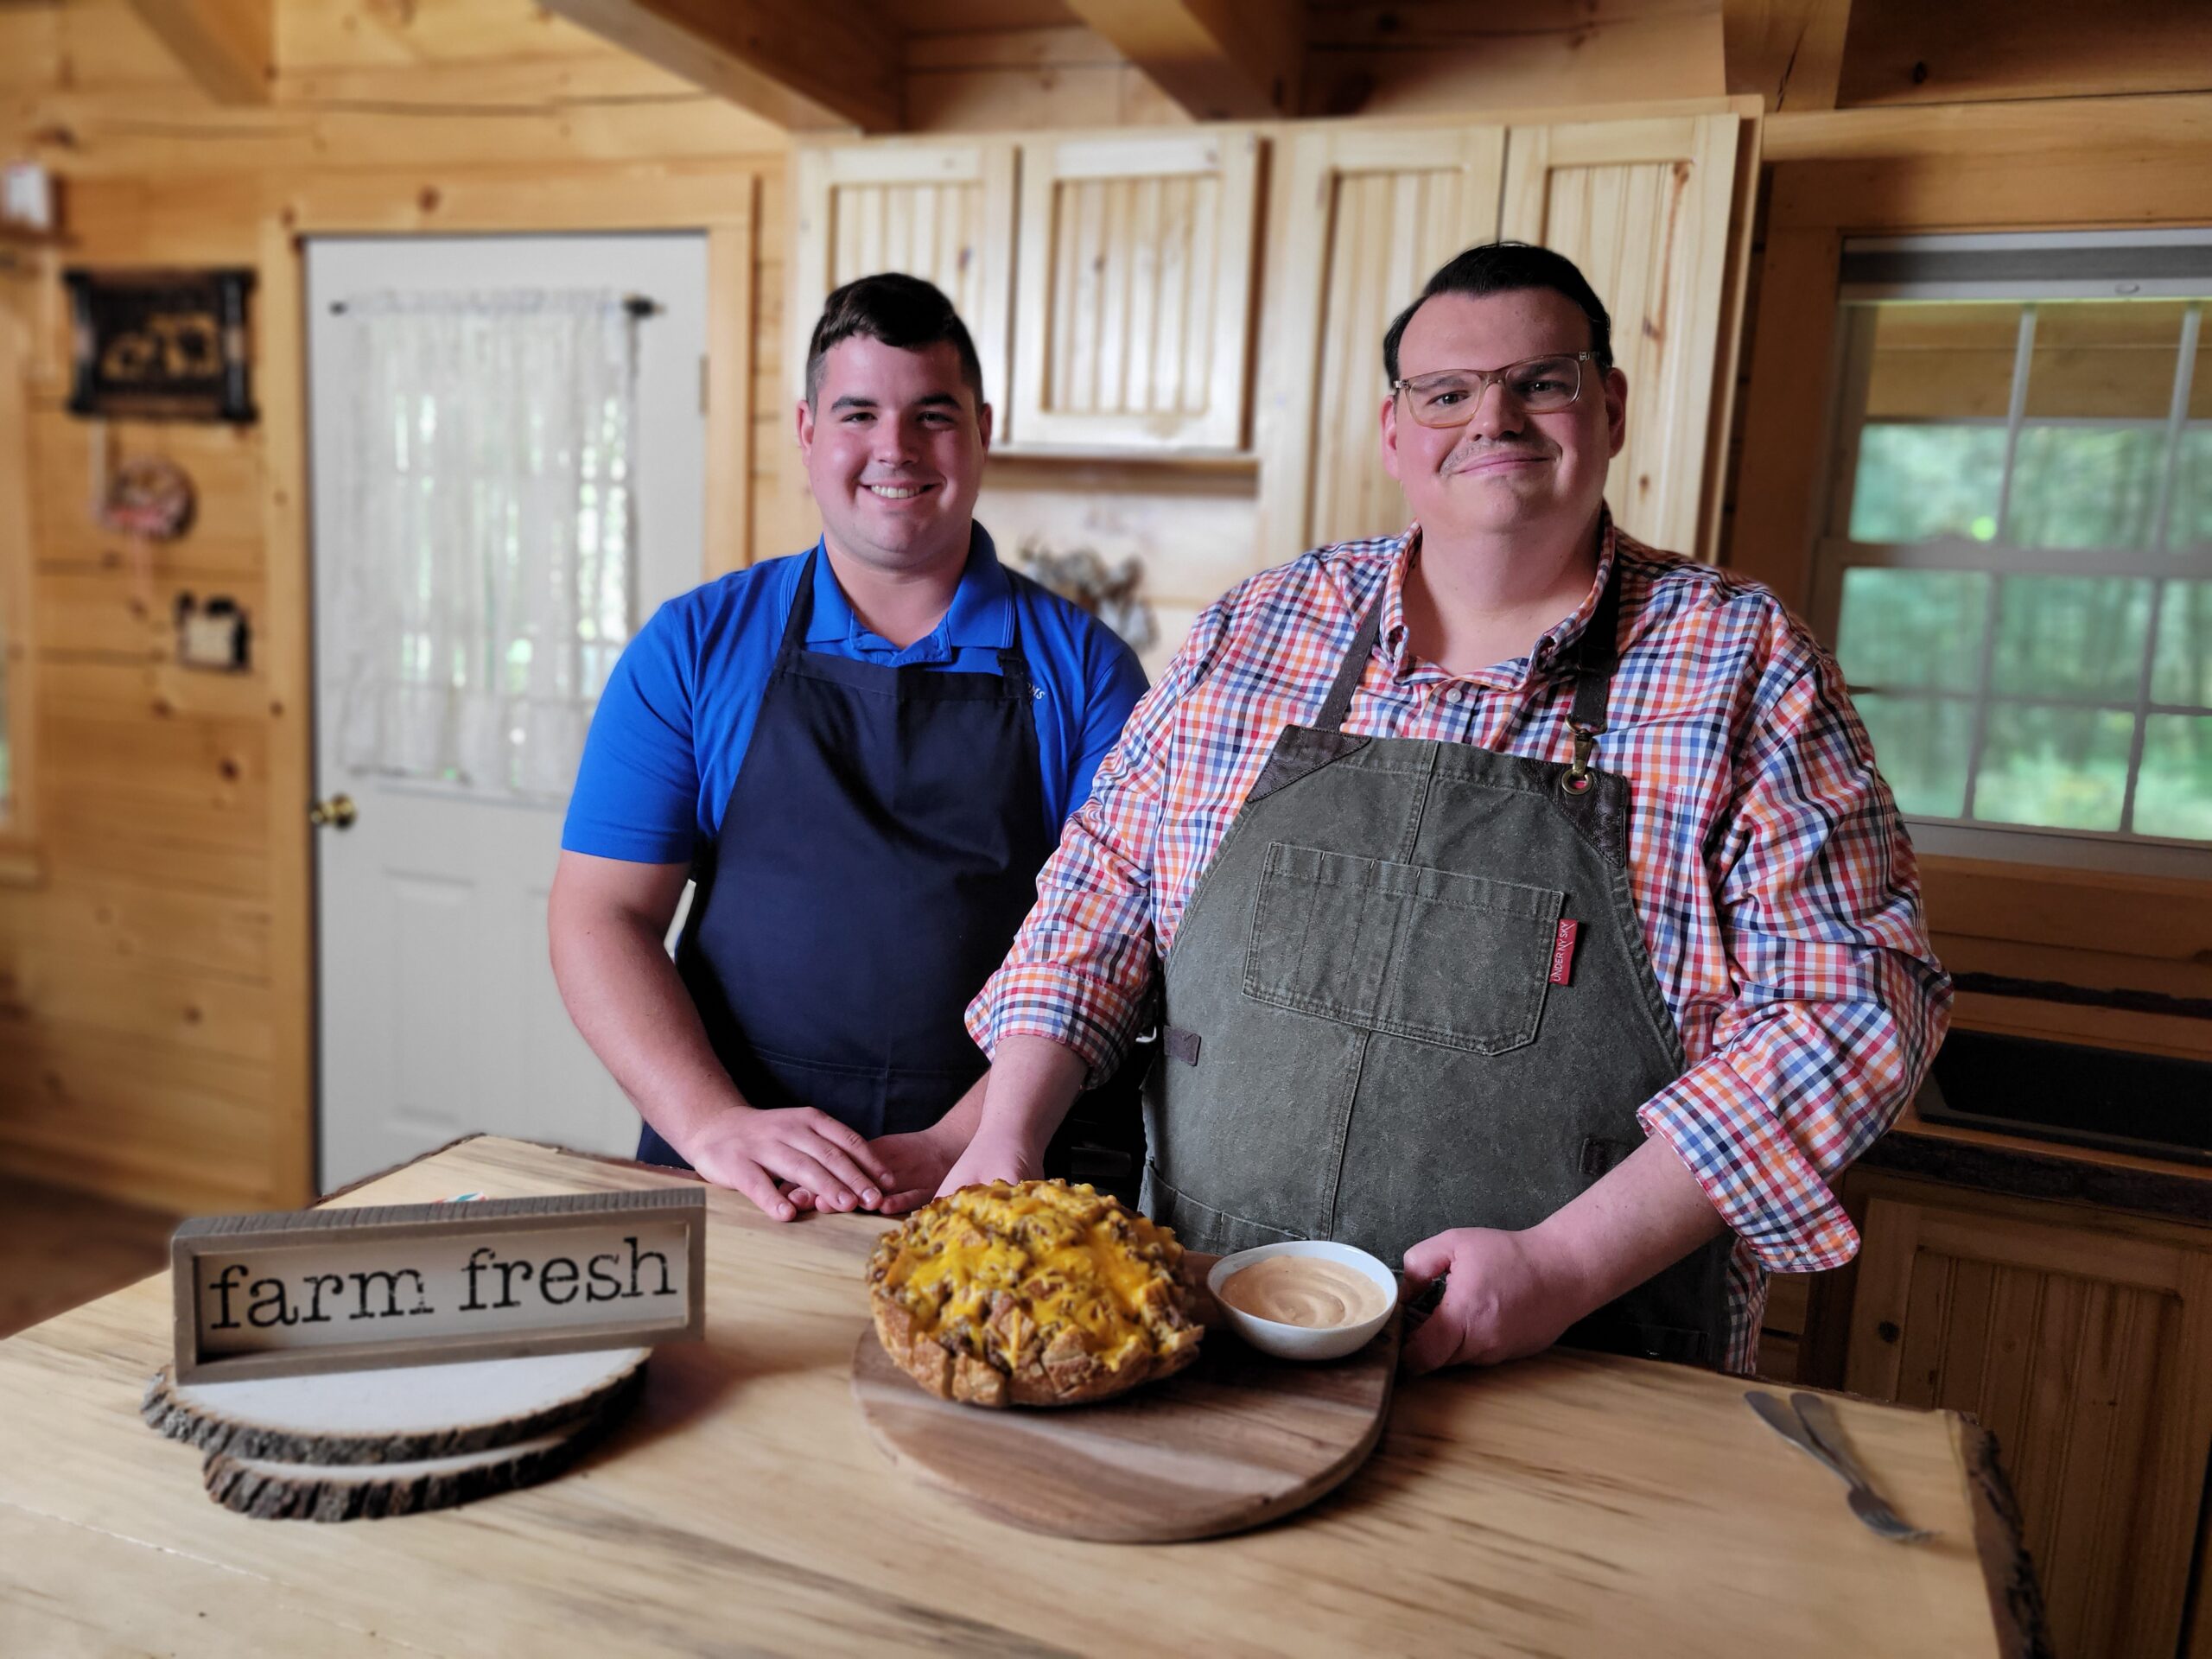 250-Year Old Loganton Dairy Farm Featured in “Chef Meets Farm” Cooking Series